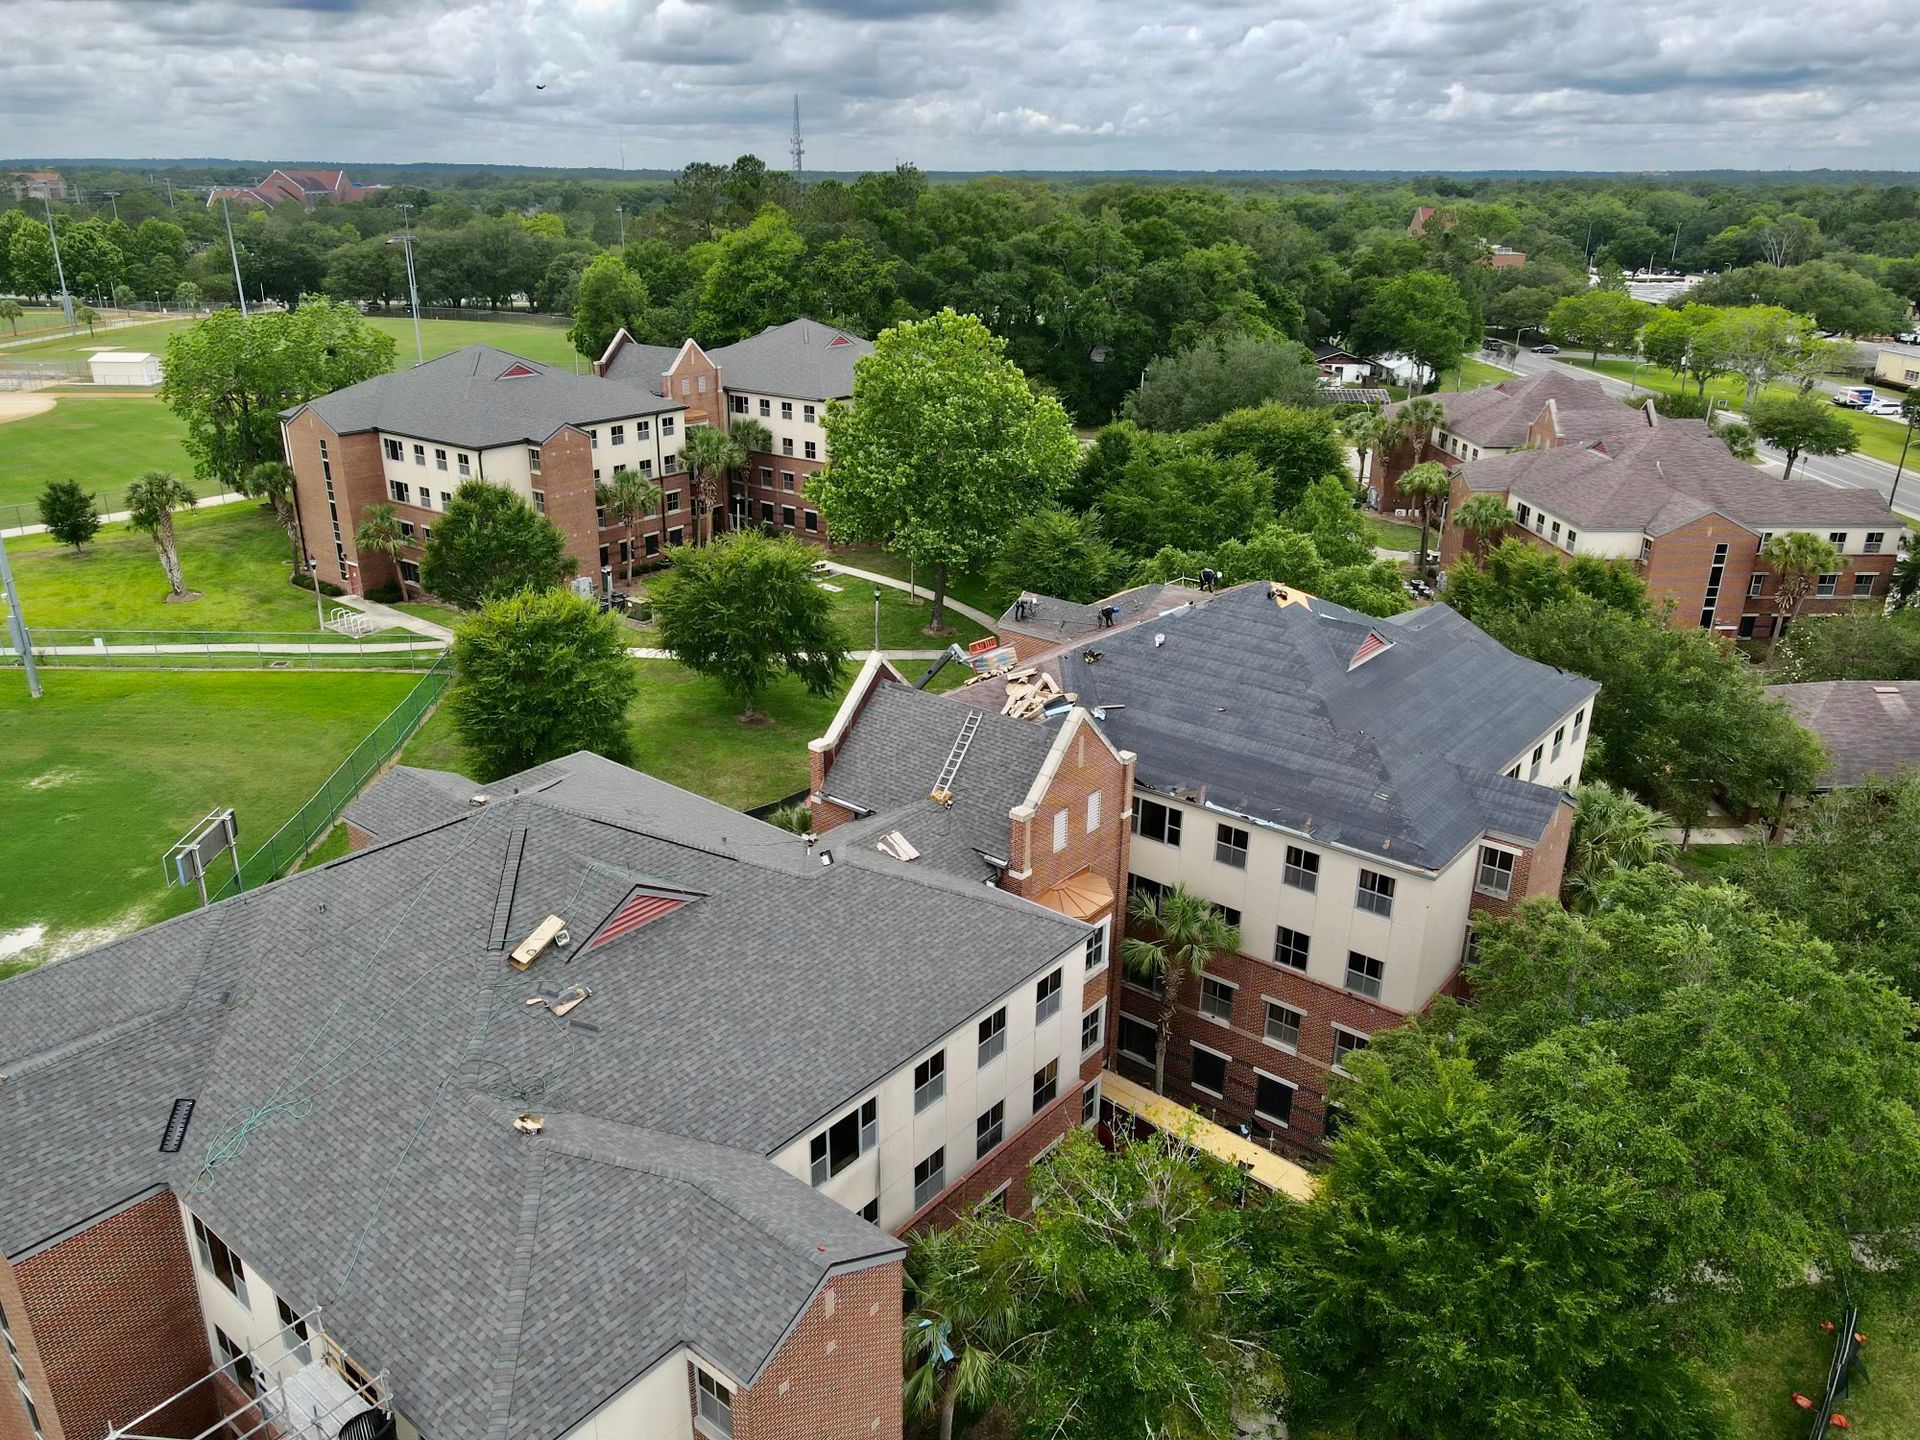 Commercial roofing project at University of Florida